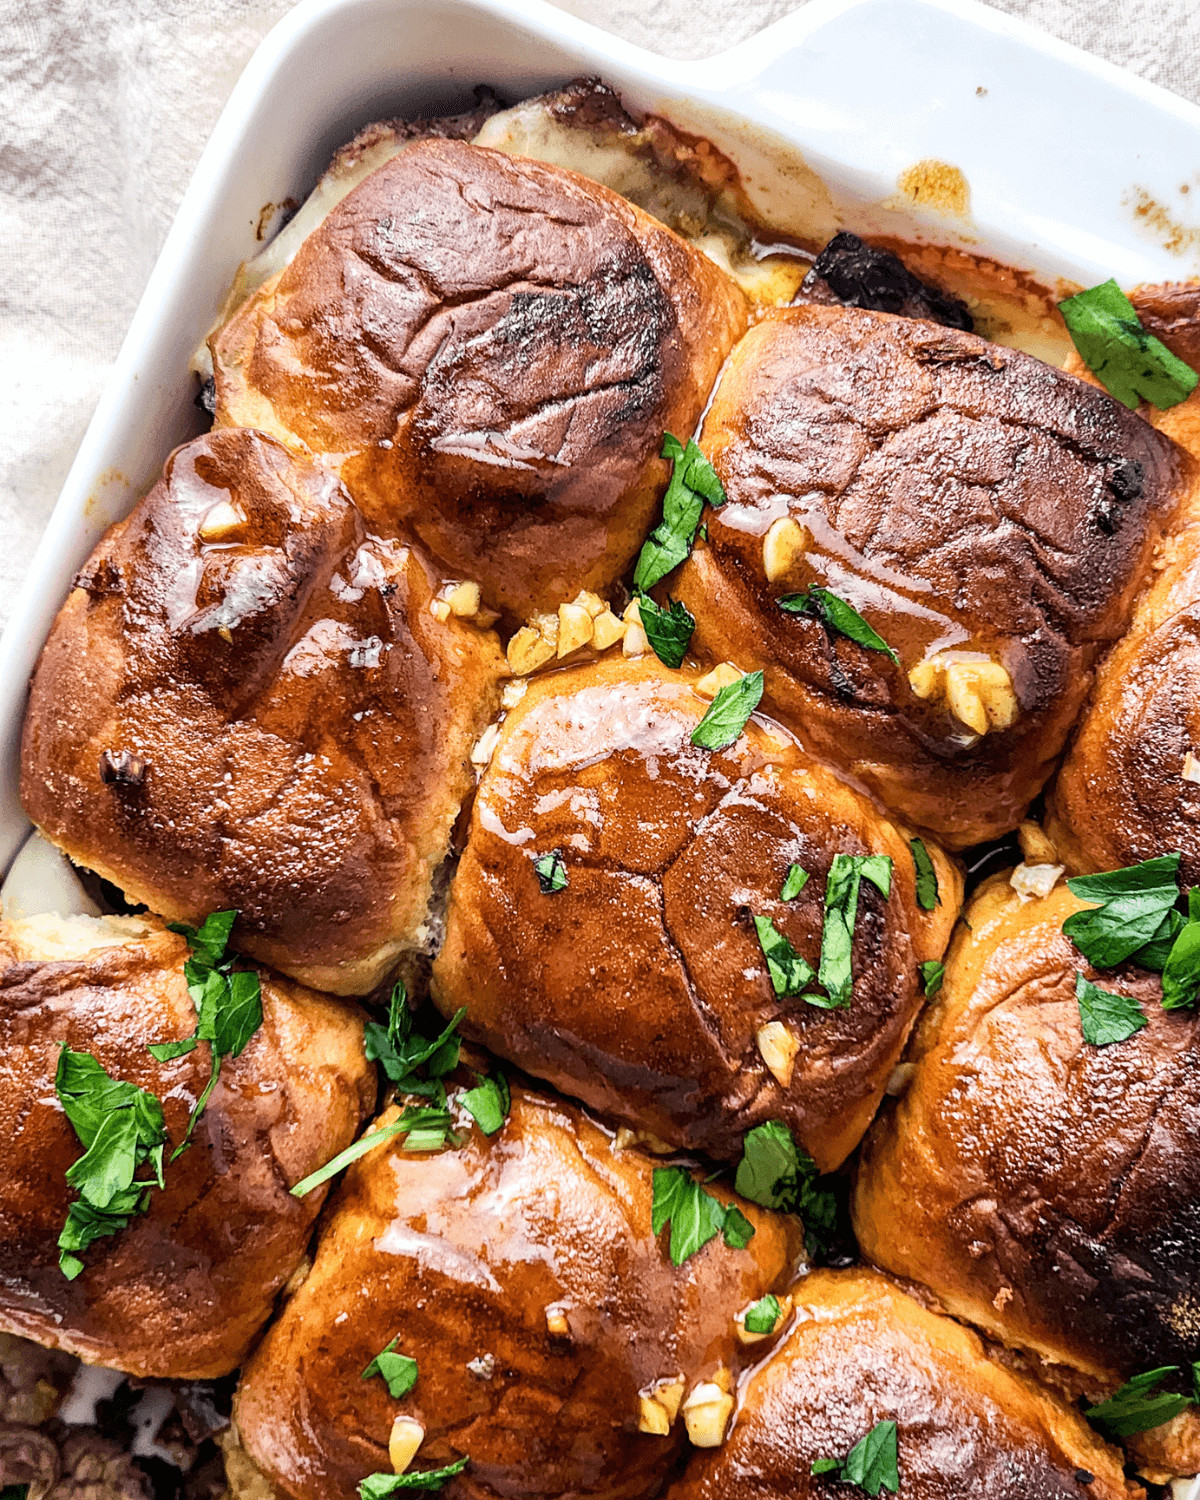 A dish of baked steak and cheese sliders garnished with chopped herbs in a white casserole.